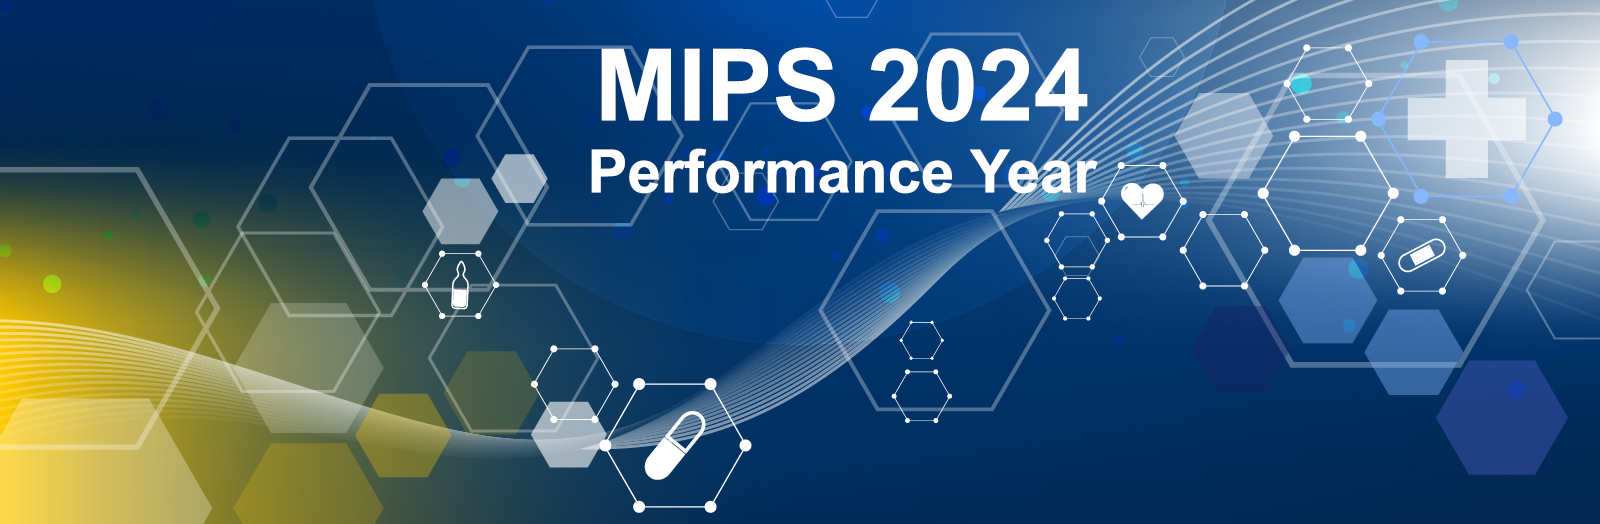 MIPS 2024